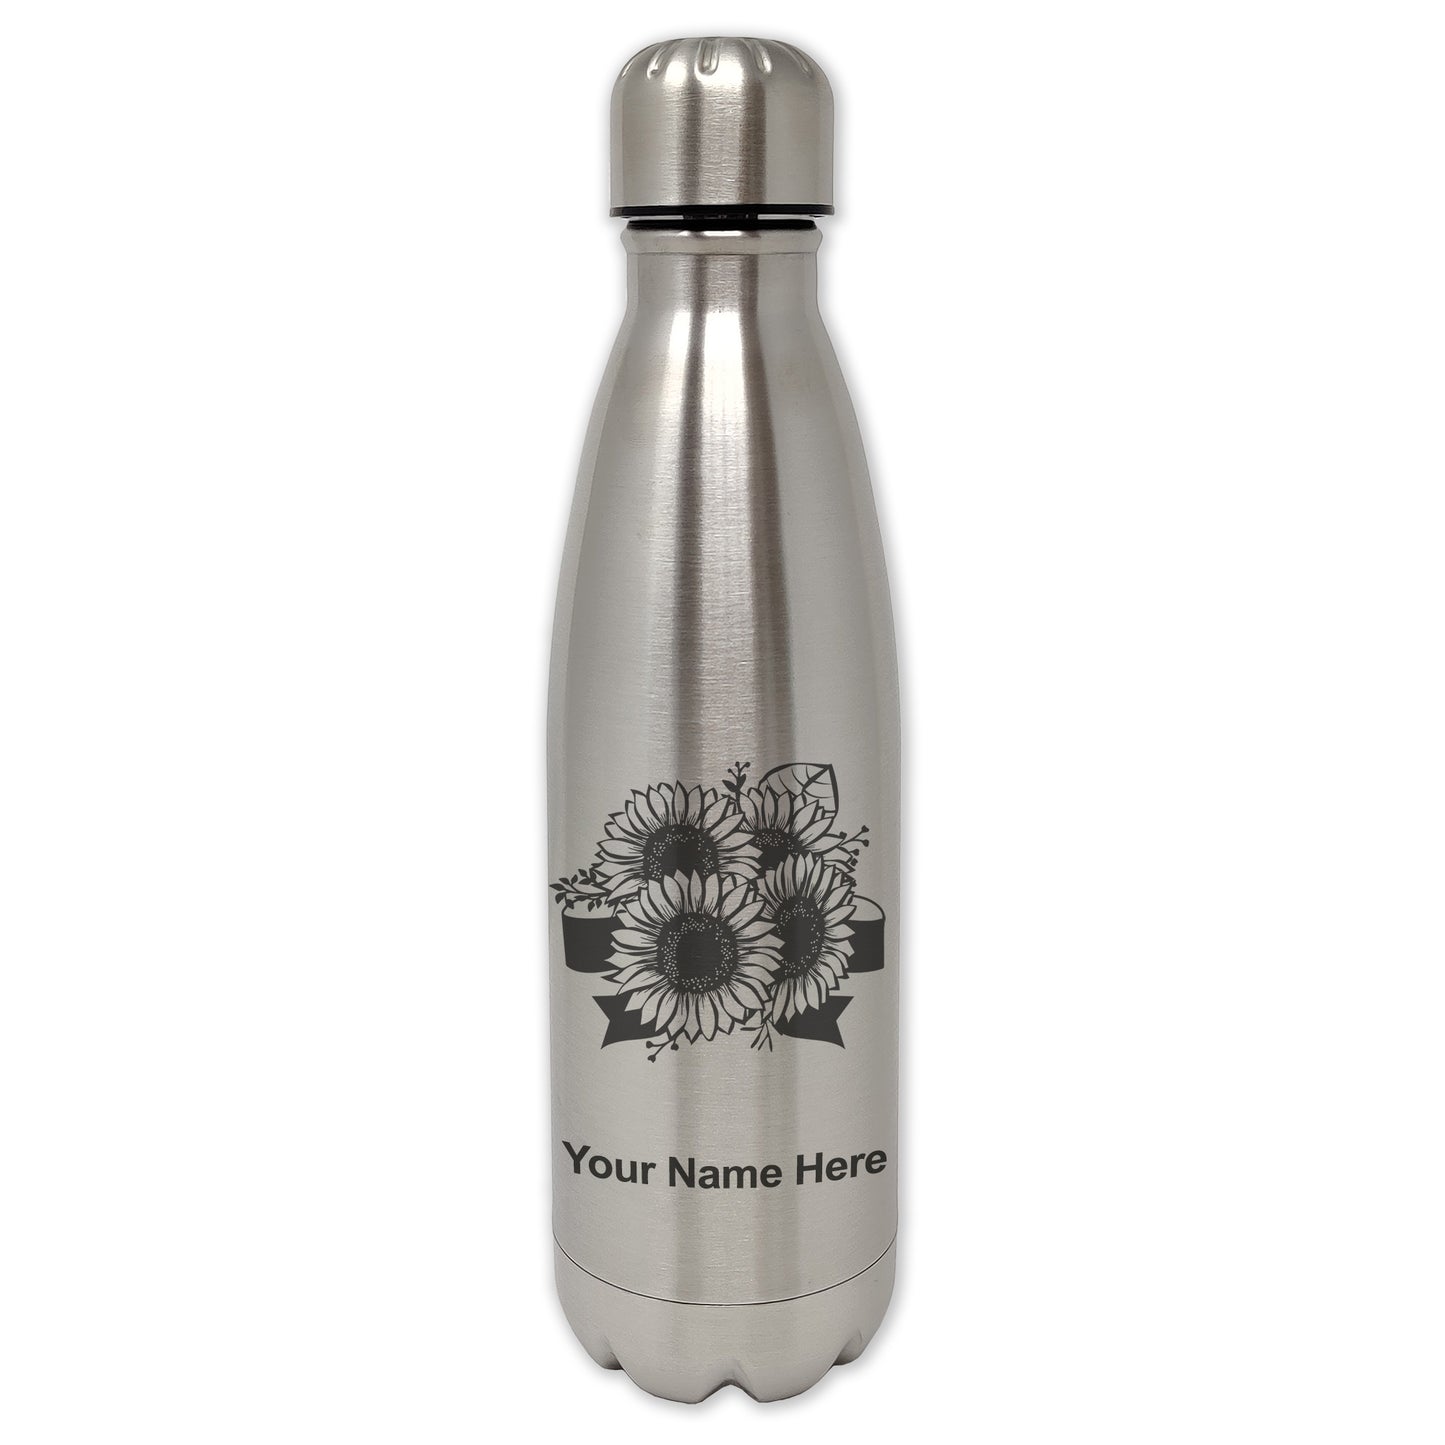 LaserGram Single Wall Water Bottle, Sunflowers, Personalized Engraving Included